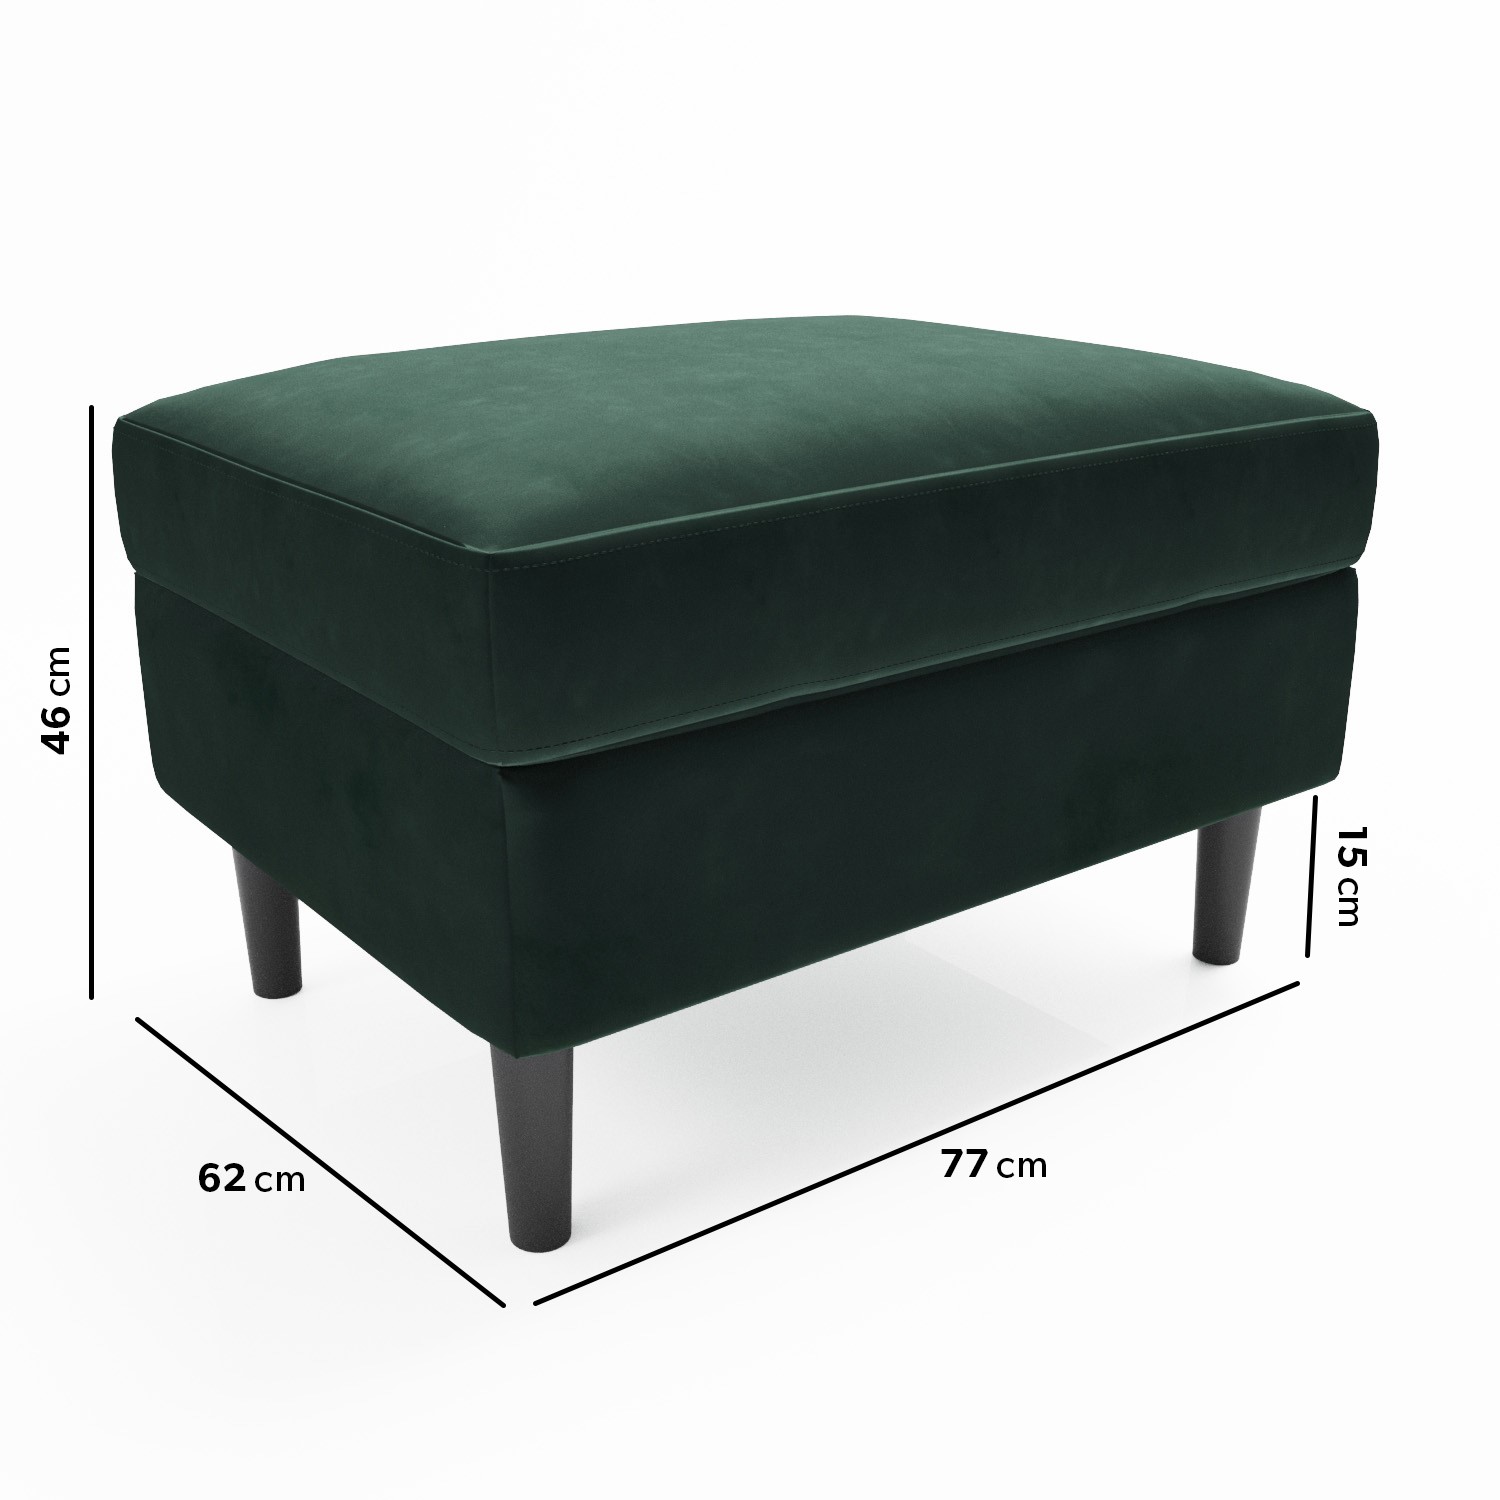 Read more about Large green velvet footstool frankie